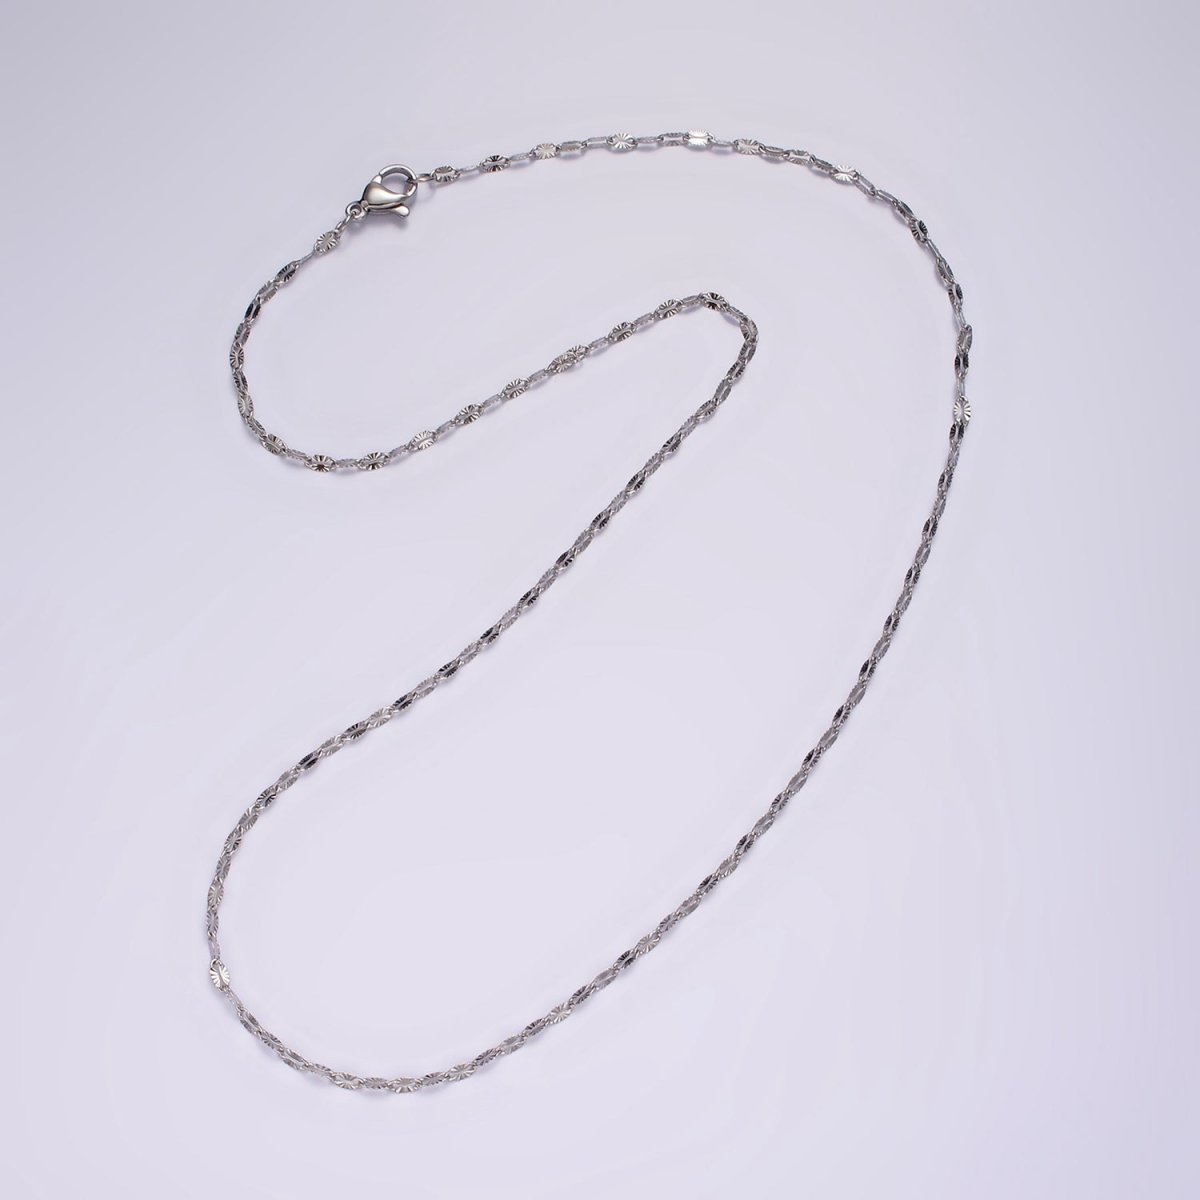 Dainty Stainless Steel Sunburst Diamond Cut Cable Chain Necklace 18 inch in Silver | WA-2404 - DLUXCA